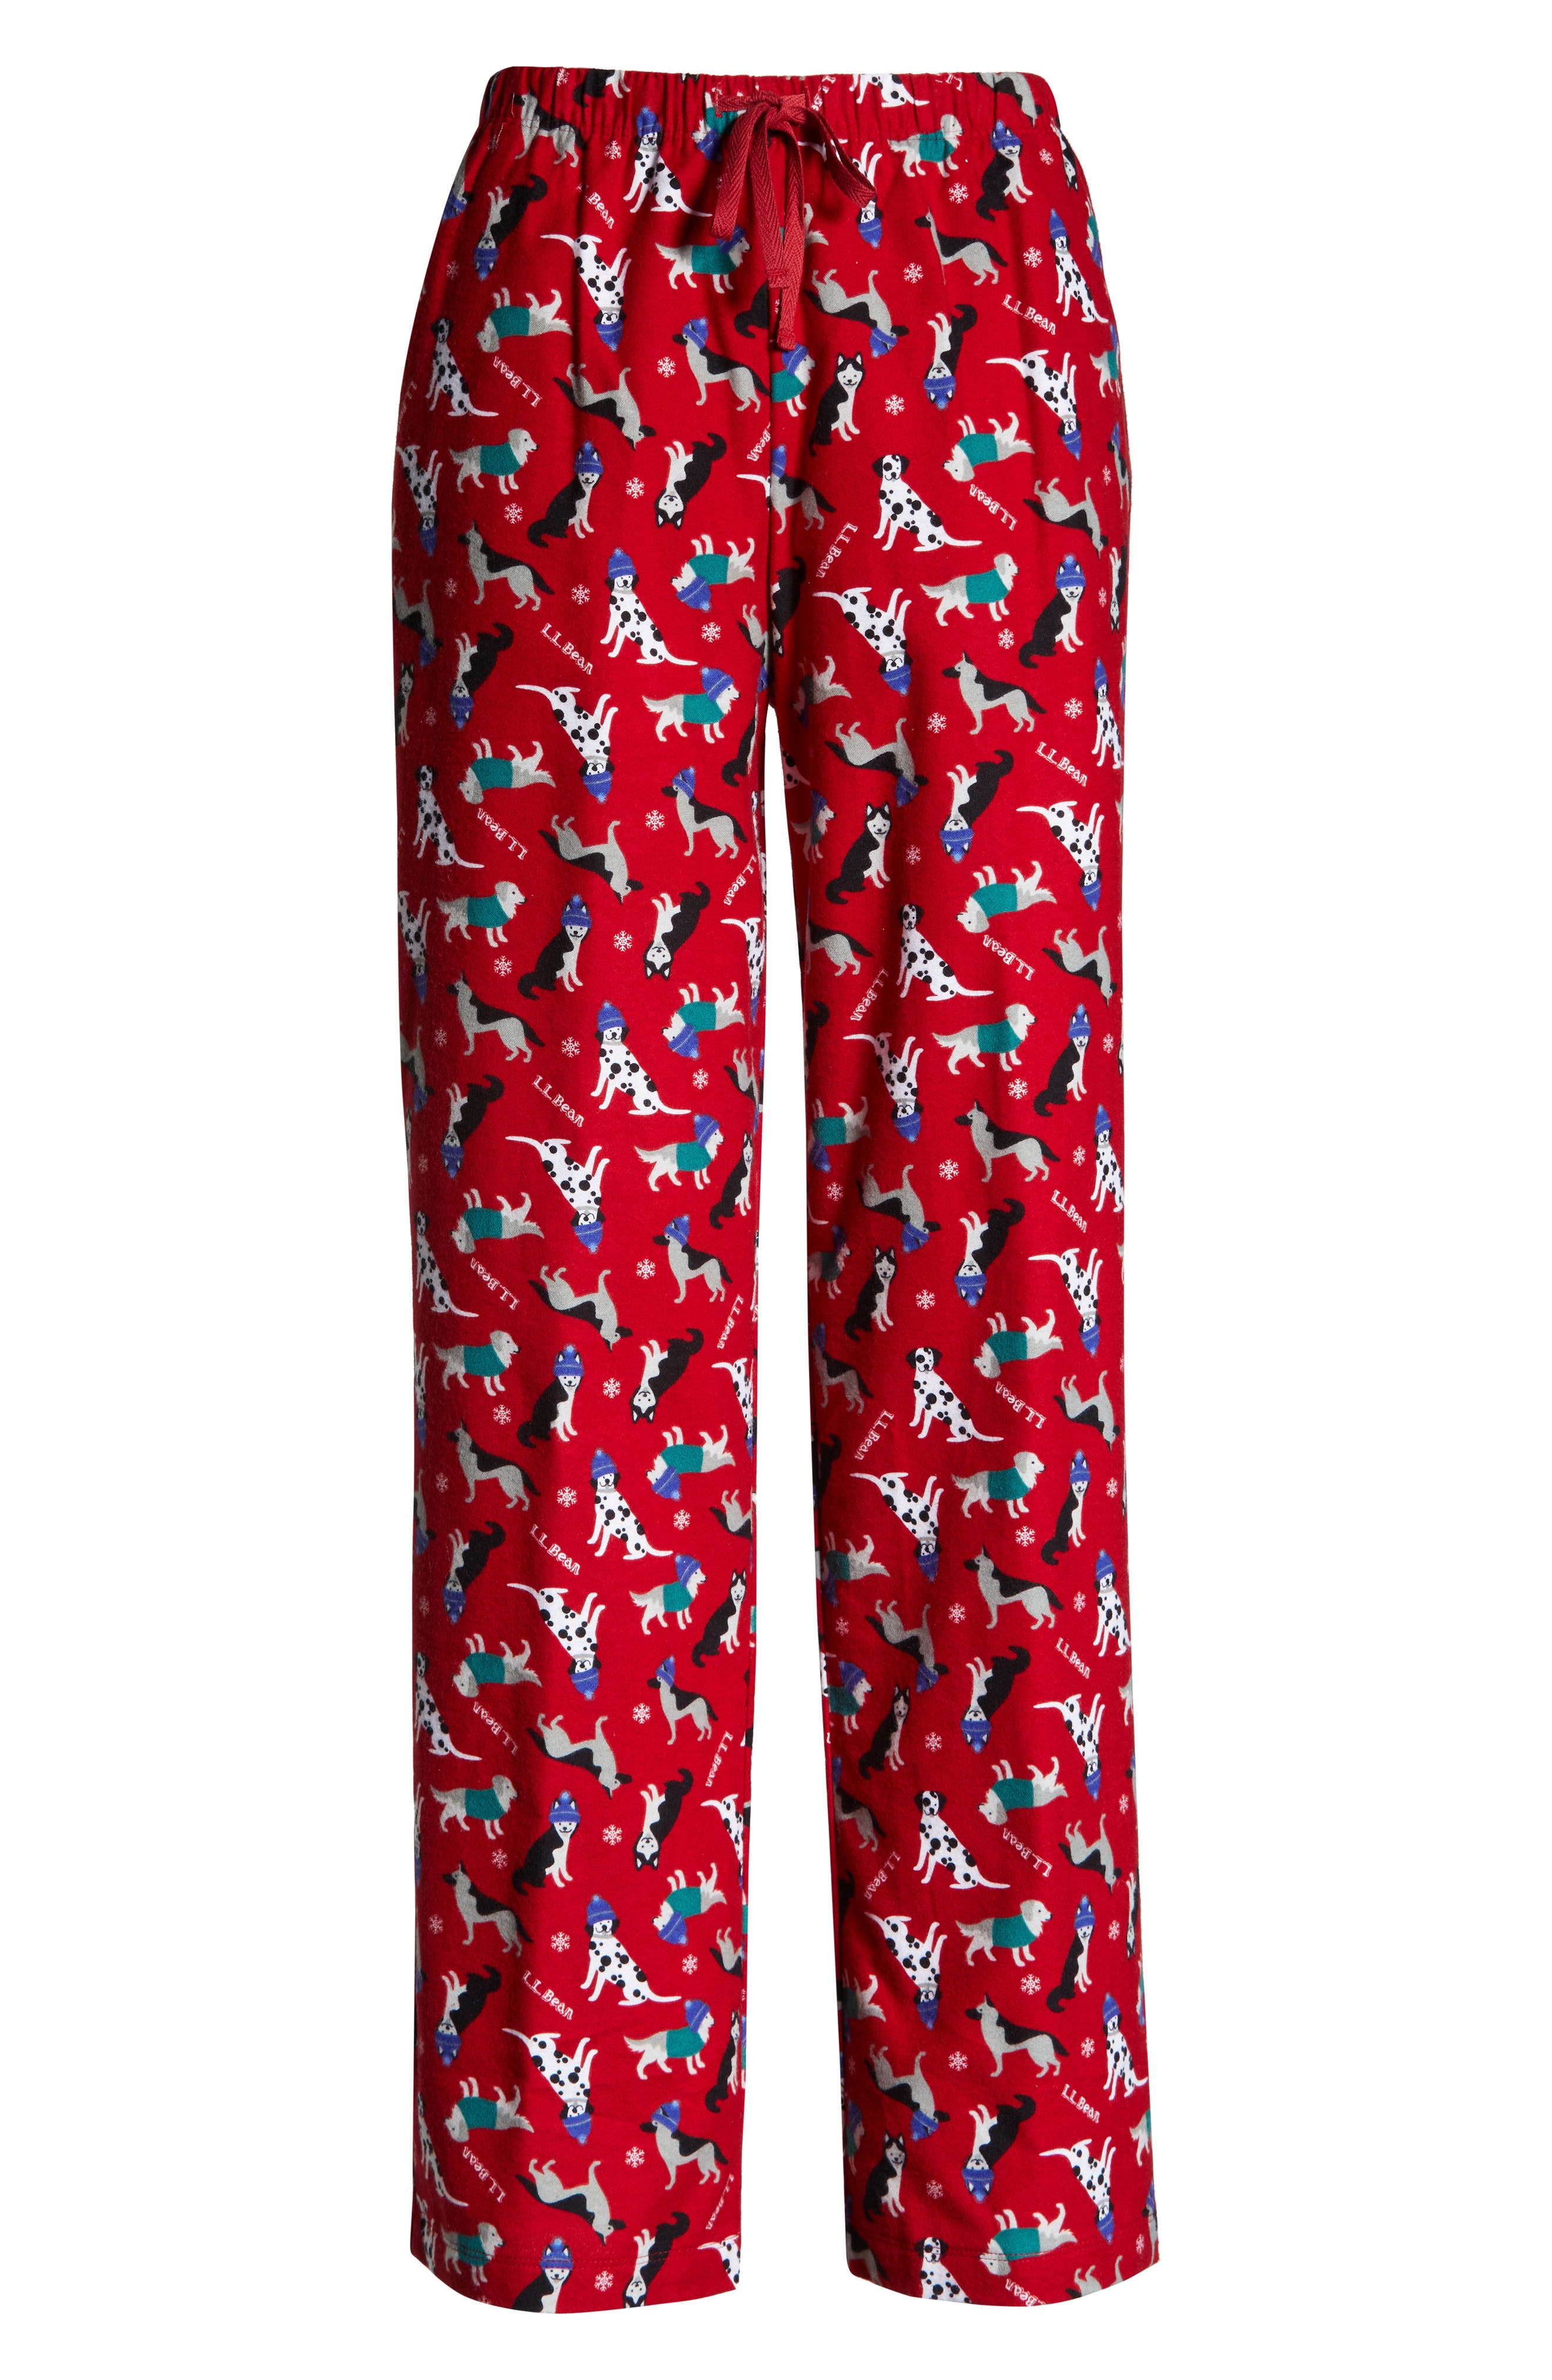 Official Adults Liverpool Lounge Pants 100% Cotton - Sizes S to XL